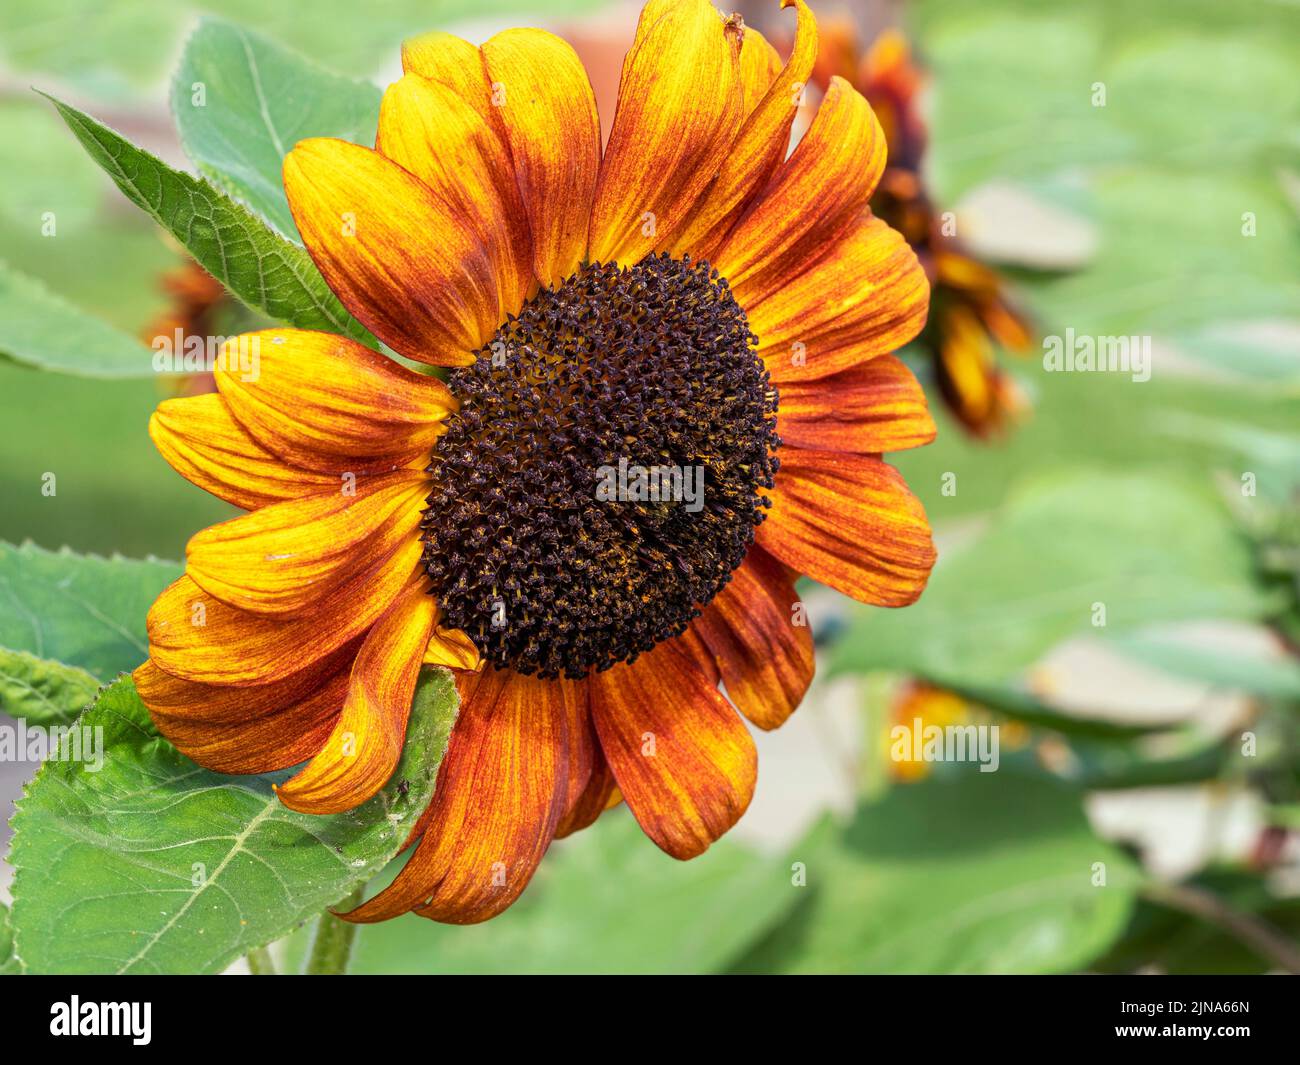 Closeup of a sunflower with bronze and yellow petals Stock Photo